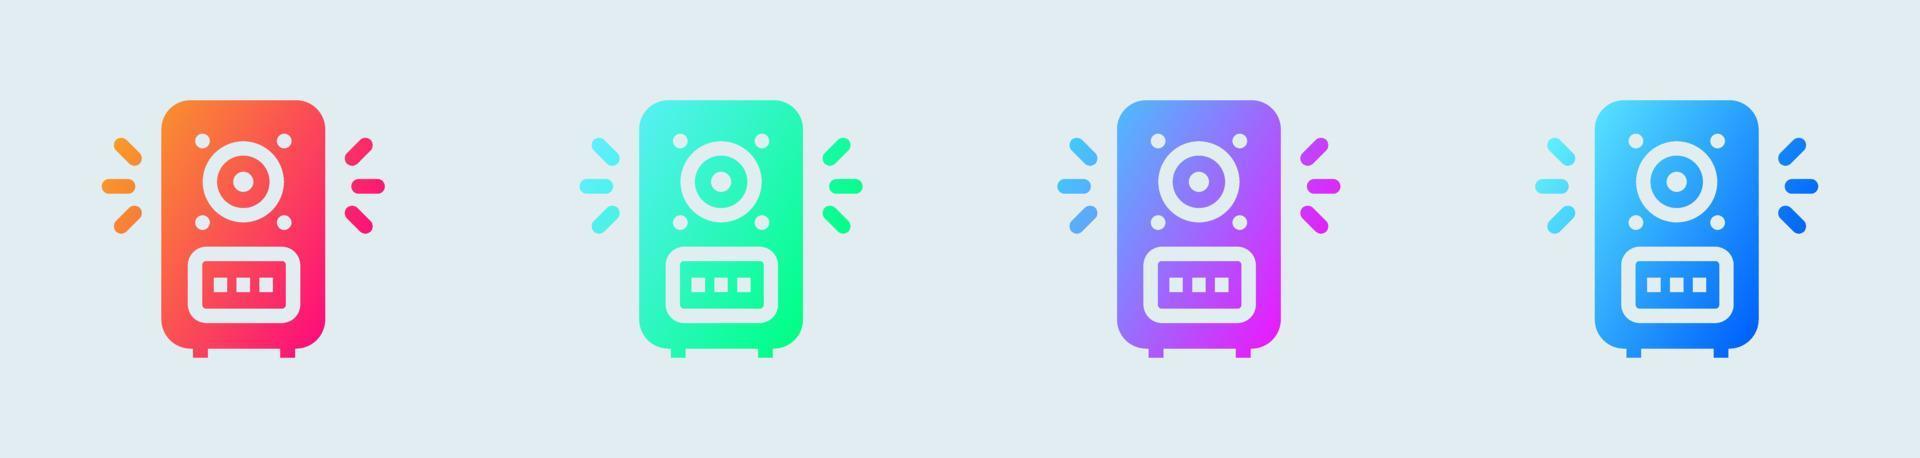 Speaker solid icon in gradient colors. Audio signs vector illustration